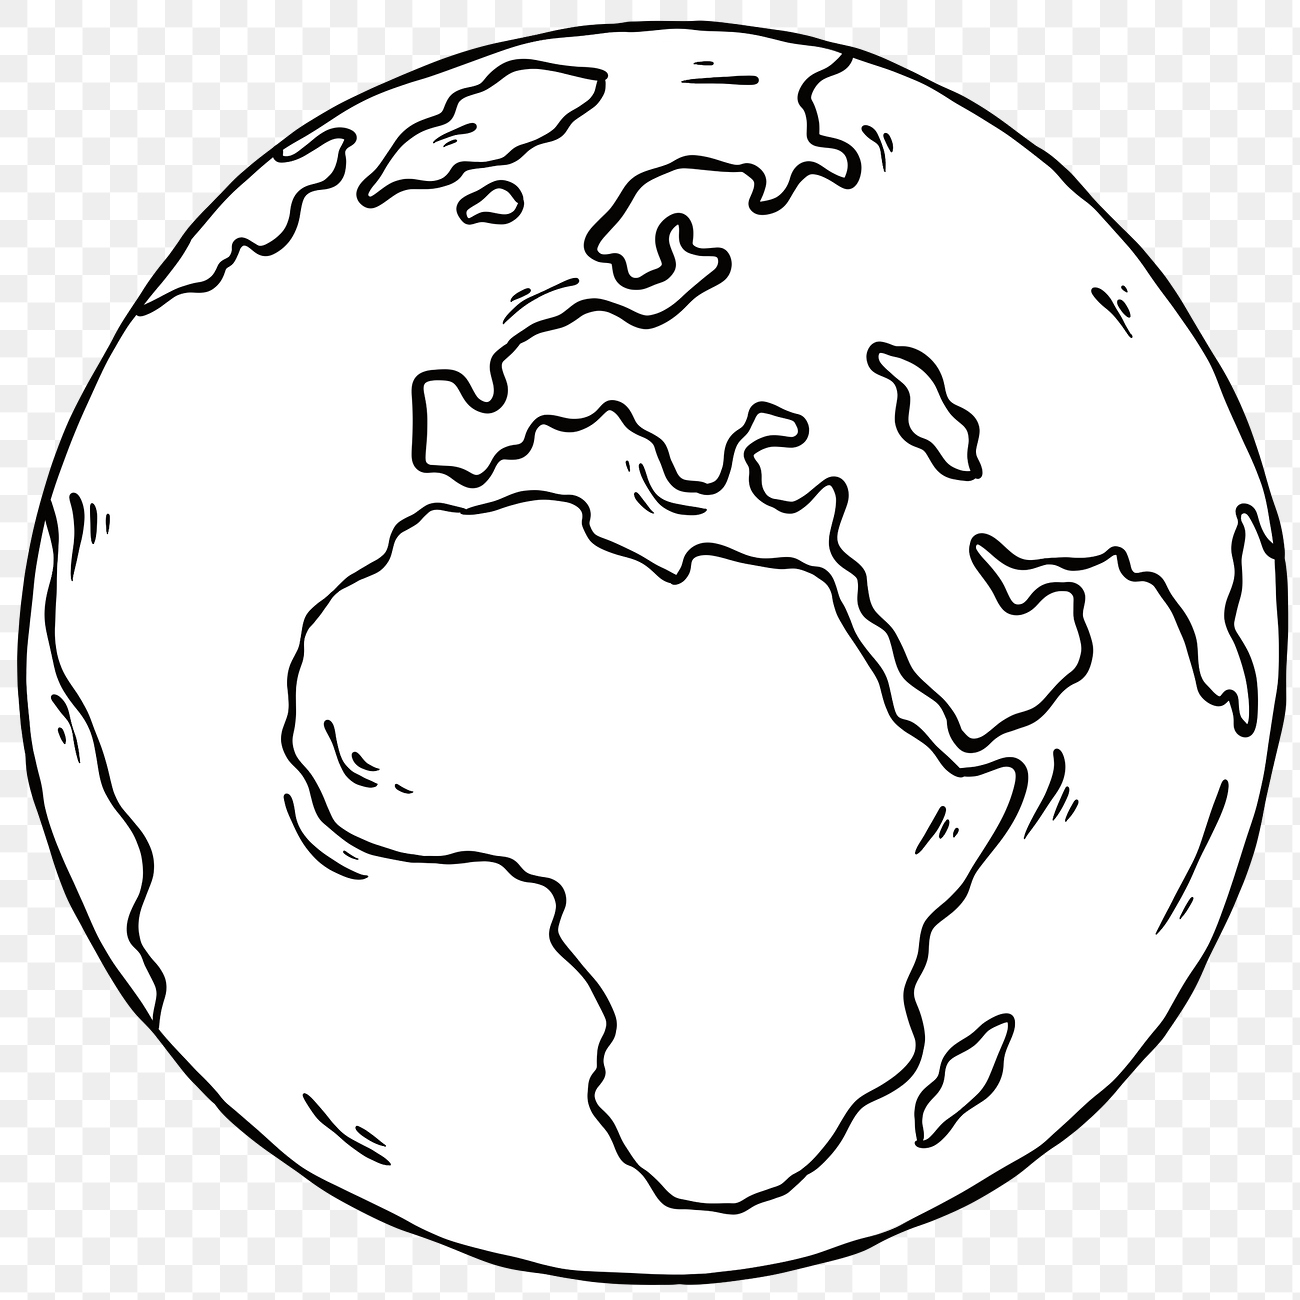 Hand drawn earth png sticker Free stock illustration High